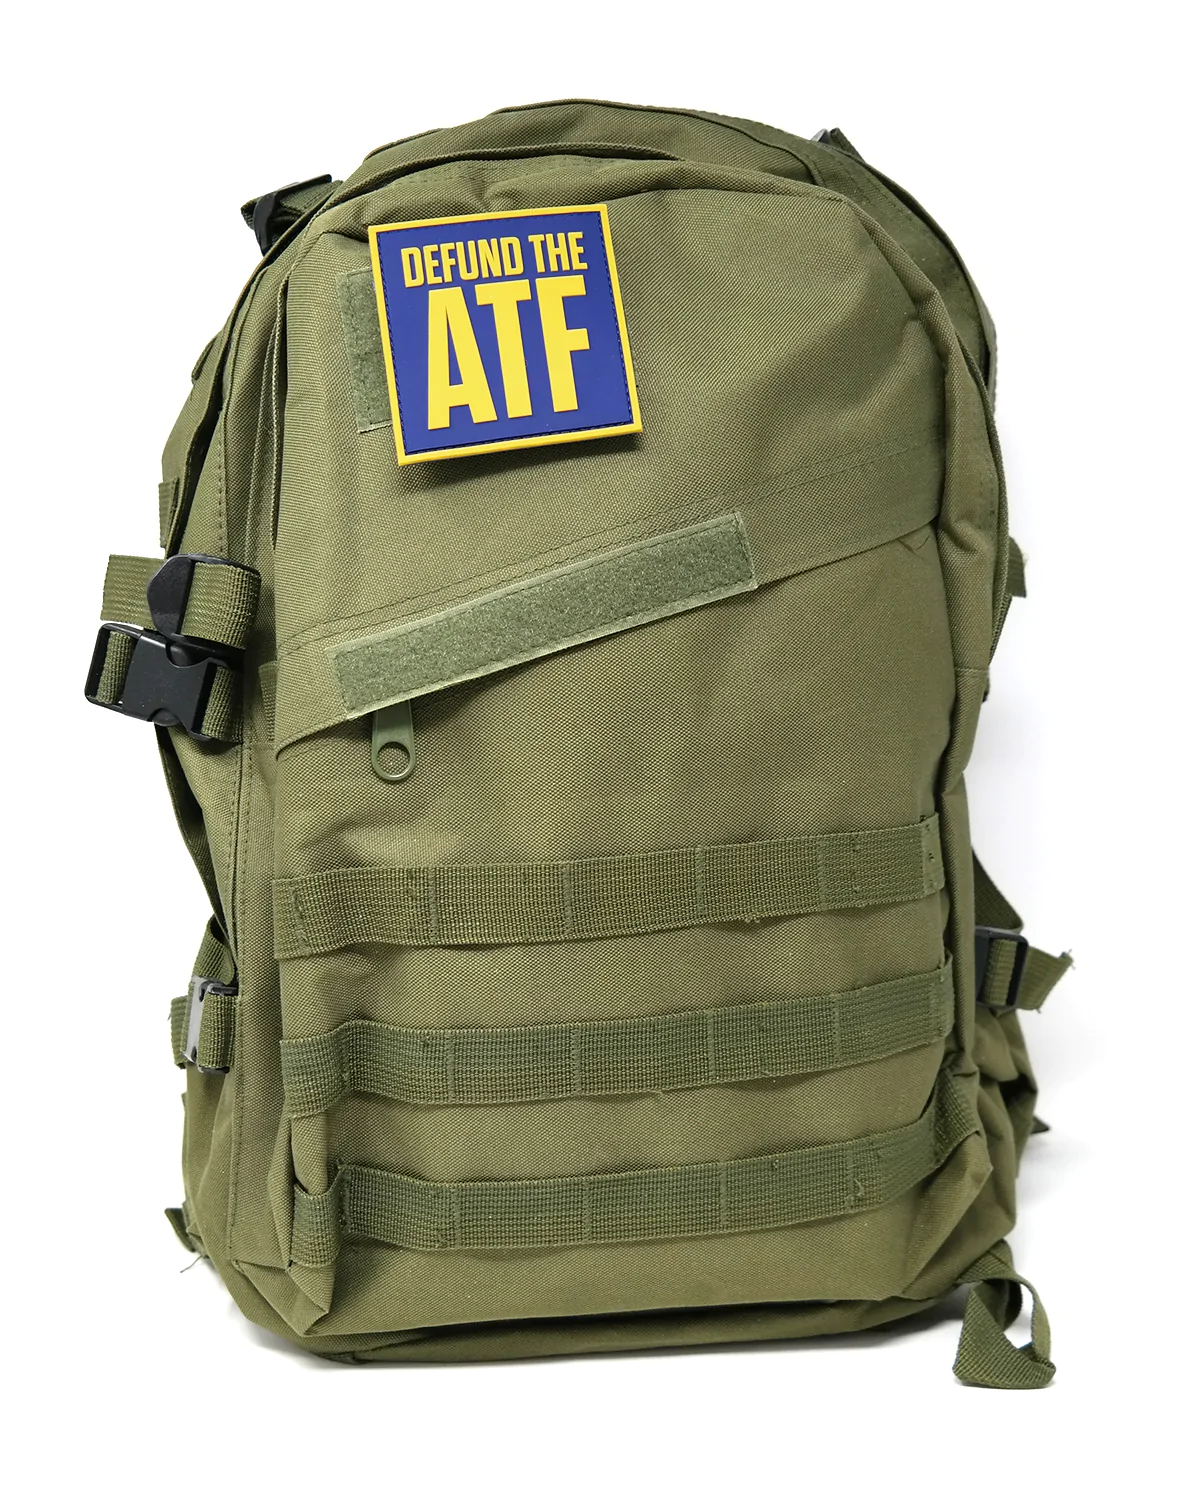 Defund-the-ATF-PVC-Patch-on-bag-2_1024x1024@2x.webp